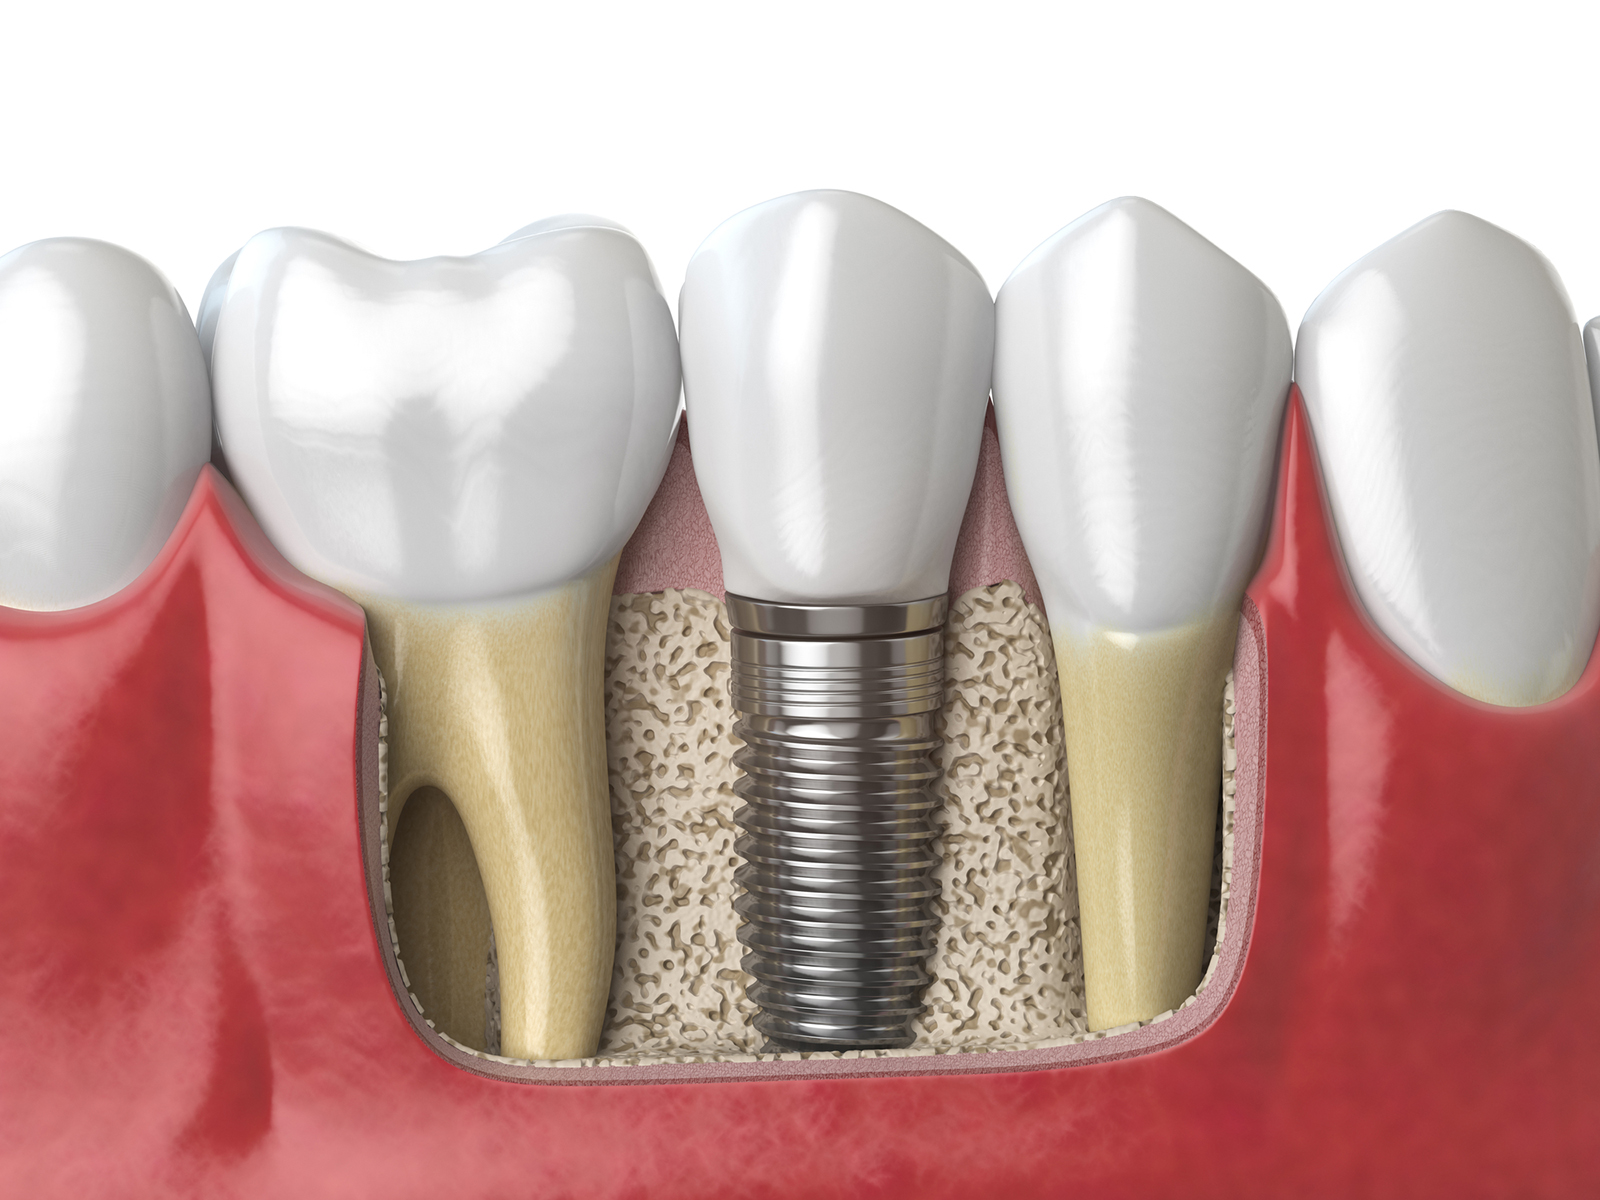 Why are tooth implants so expensive?